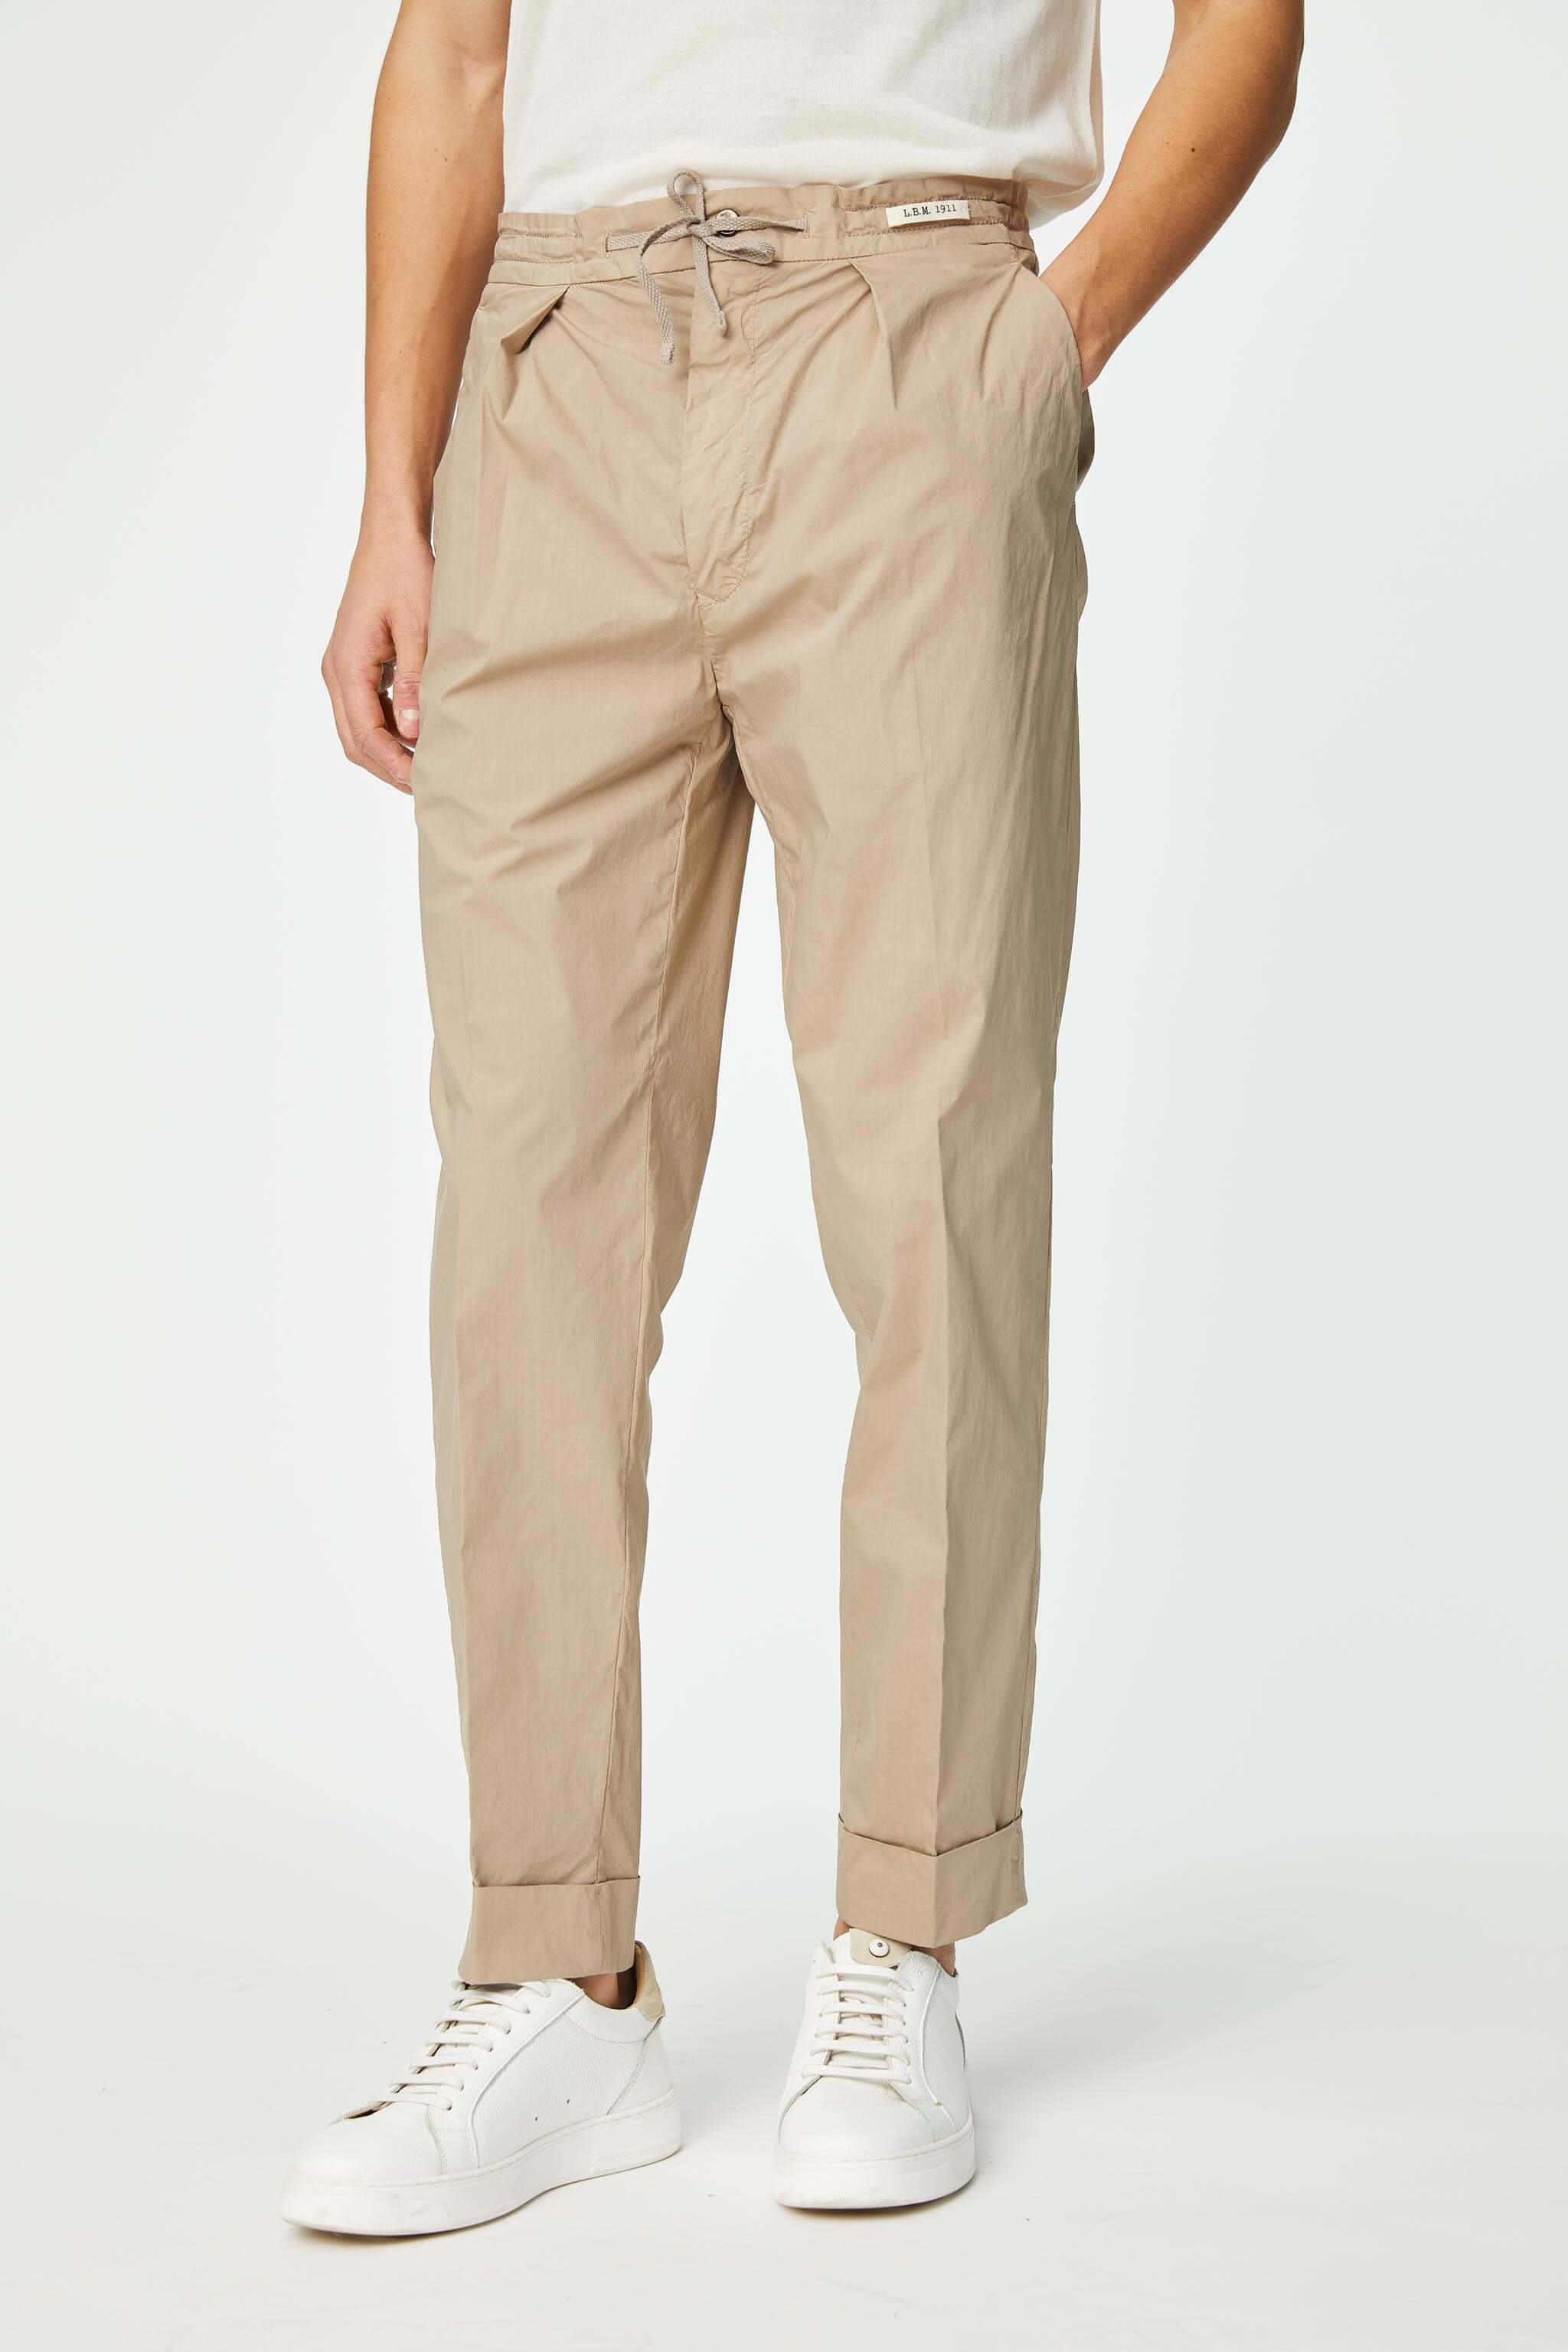 Garment-dyed LESTER pants in beige